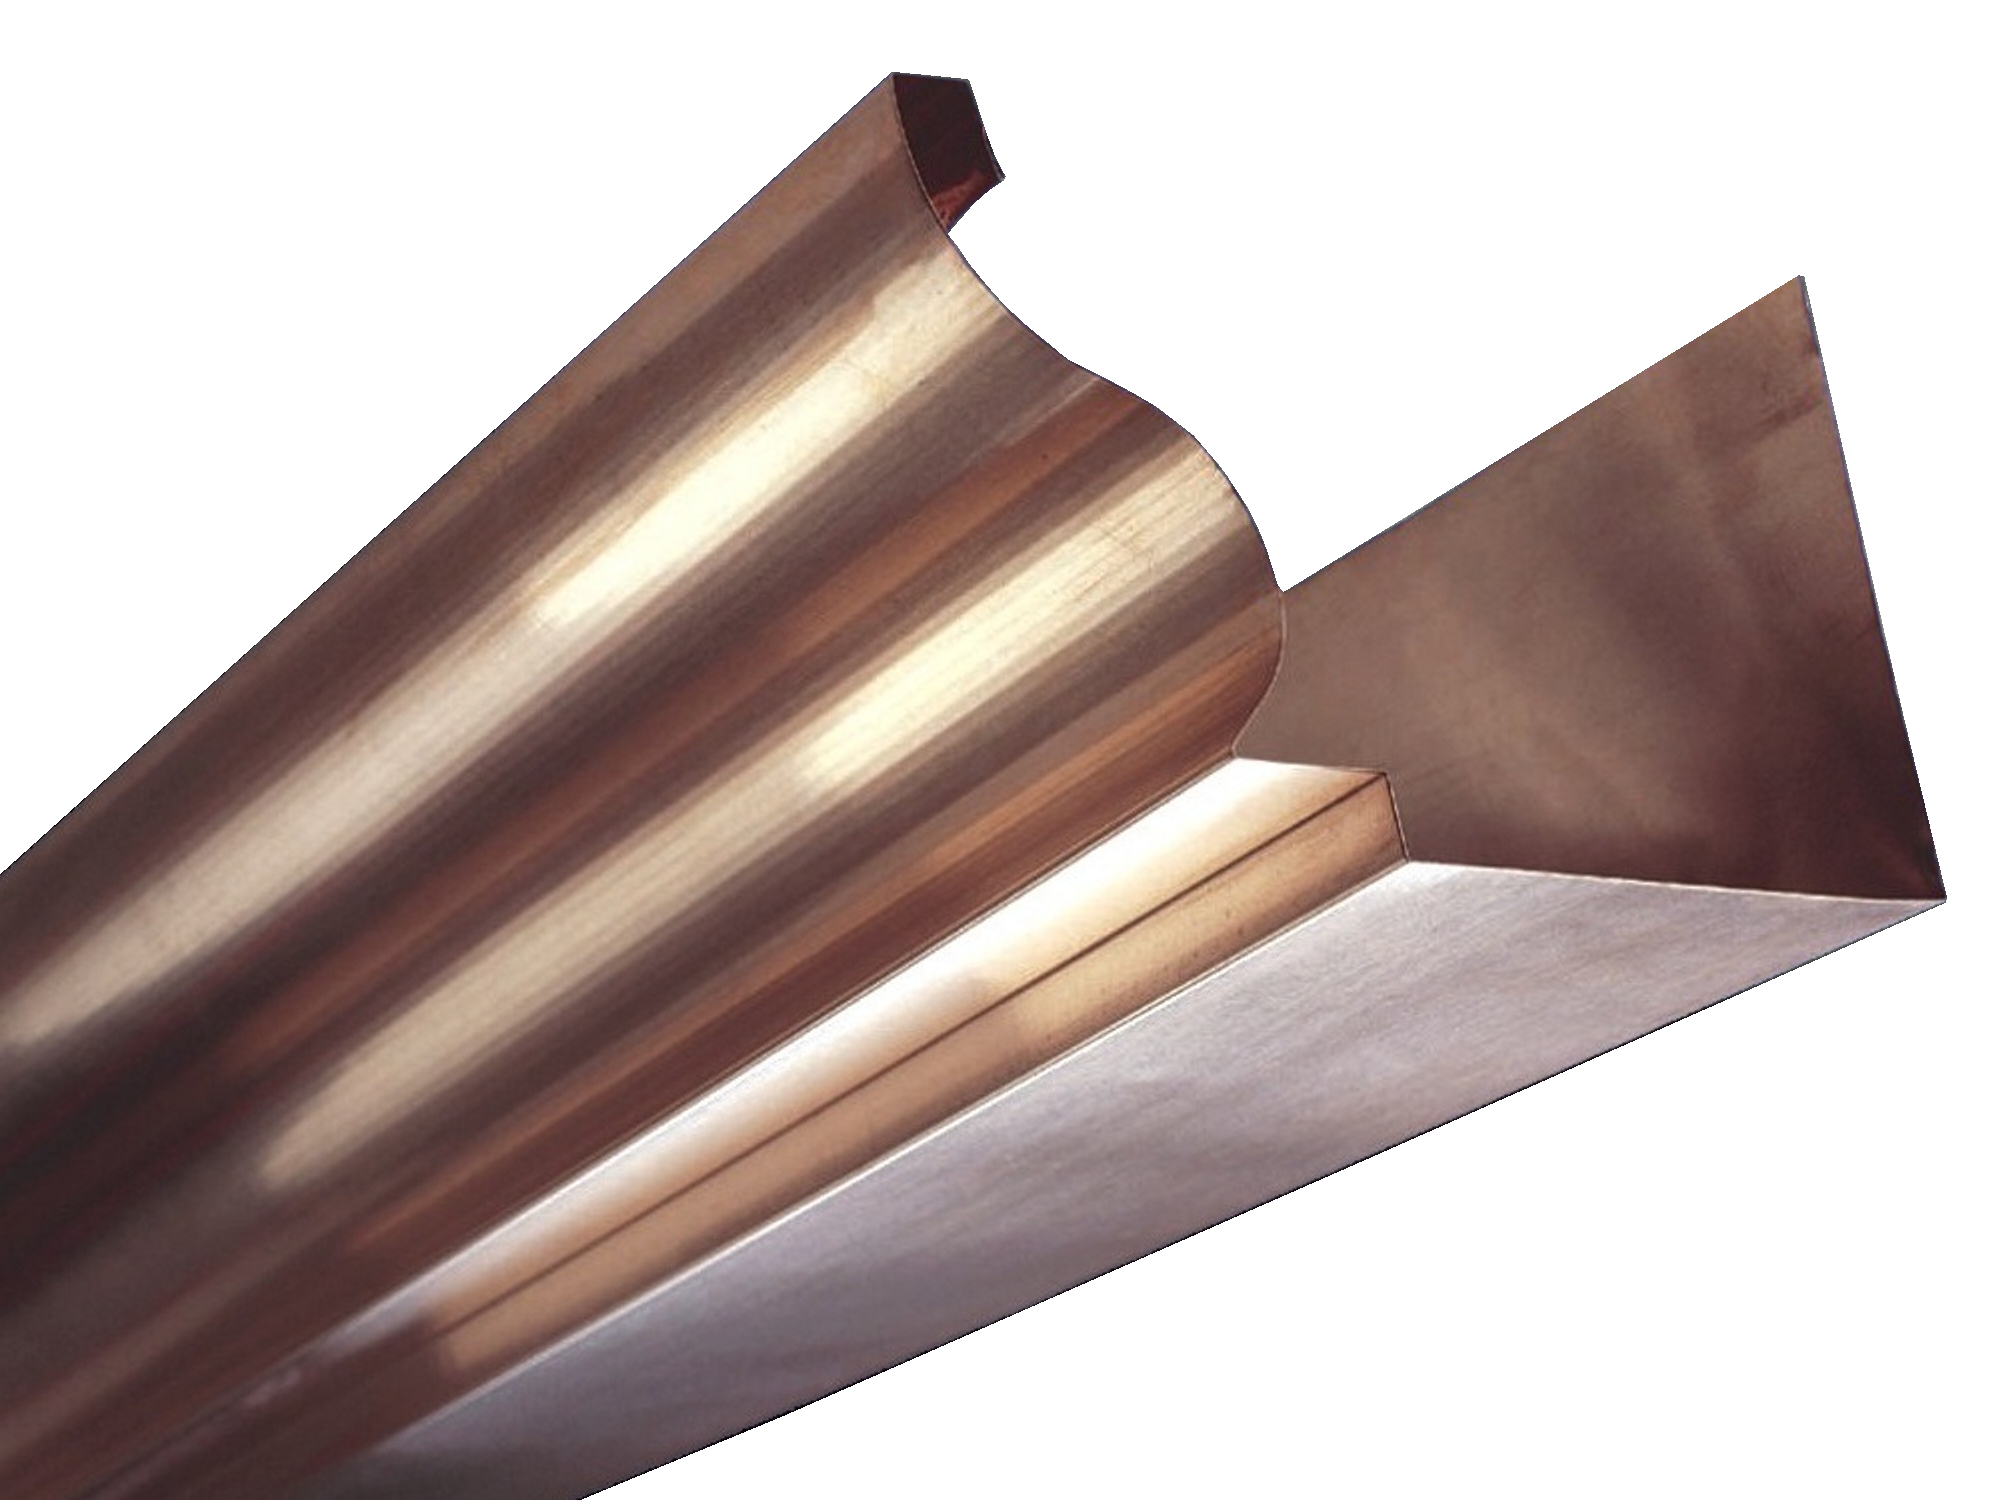 Copper gutter with different angles, radii and hems